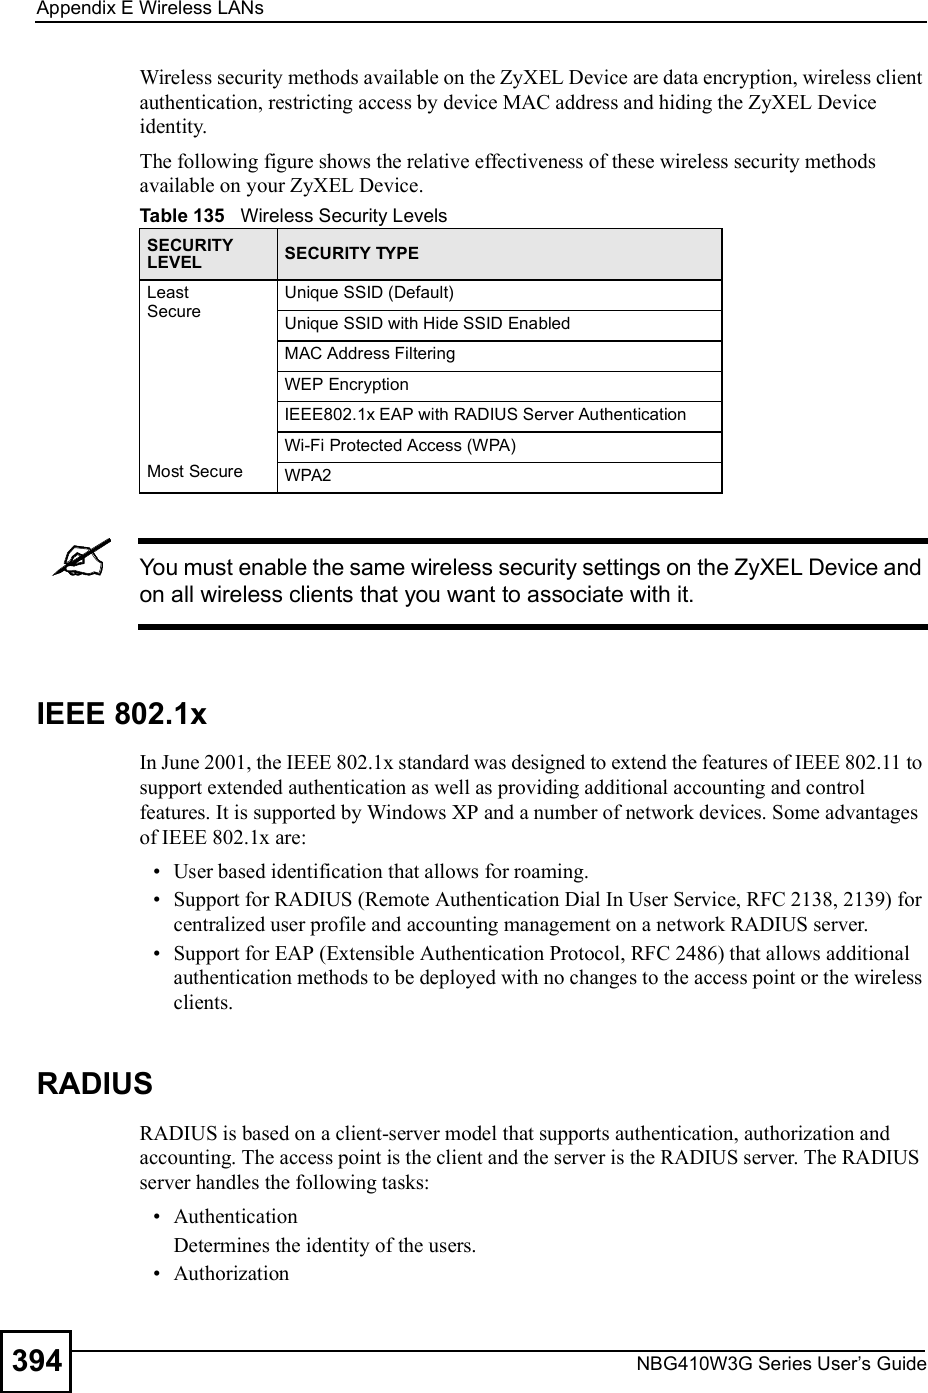 Appendix EWireless LANsNBG410W3G Series User s Guide394Wireless security methods available on the ZyXEL Device are data encryption, wireless client authentication, restricting access by device MAC address and hiding the ZyXEL Device identity.The following figure shows the relative effectiveness of these wireless security methods available on your ZyXEL Device.You must enable the same wireless security settings on the ZyXEL Device and on all wireless clients that you want to associate with it. IEEE 802.1xIn June 2001, the IEEE 802.1x standard was designed to extend the features of IEEE 802.11 to support extended authentication as well as providing additional accounting and control features. It is supported by Windows XP and a number of network devices. Some advantages of IEEE 802.1x are: User based identification that allows for roaming. Support for RADIUS (Remote Authentication Dial In User Service, RFC 2138, 2139) for centralized user profile and accounting management on a network RADIUS server.  Support for EAP (Extensible Authentication Protocol, RFC 2486) that allows additional authentication methods to be deployed with no changes to the access point or the wireless clients. RADIUSRADIUS is based on a client-server model that supports authentication, authorization and accounting. The access point is the client and the server is the RADIUS server. The RADIUS server handles the following tasks: Authentication Determines the identity of the users. AuthorizationTable 135   Wireless Security LevelsSECURITY LEVEL SECURITY TYPELeast       Secure                                                                                  Most SecureUnique SSID (Default)Unique SSID with Hide SSID EnabledMAC Address FilteringWEP EncryptionIEEE802.1x EAP with RADIUS Server AuthenticationWi-Fi Protected Access (WPA)WPA2